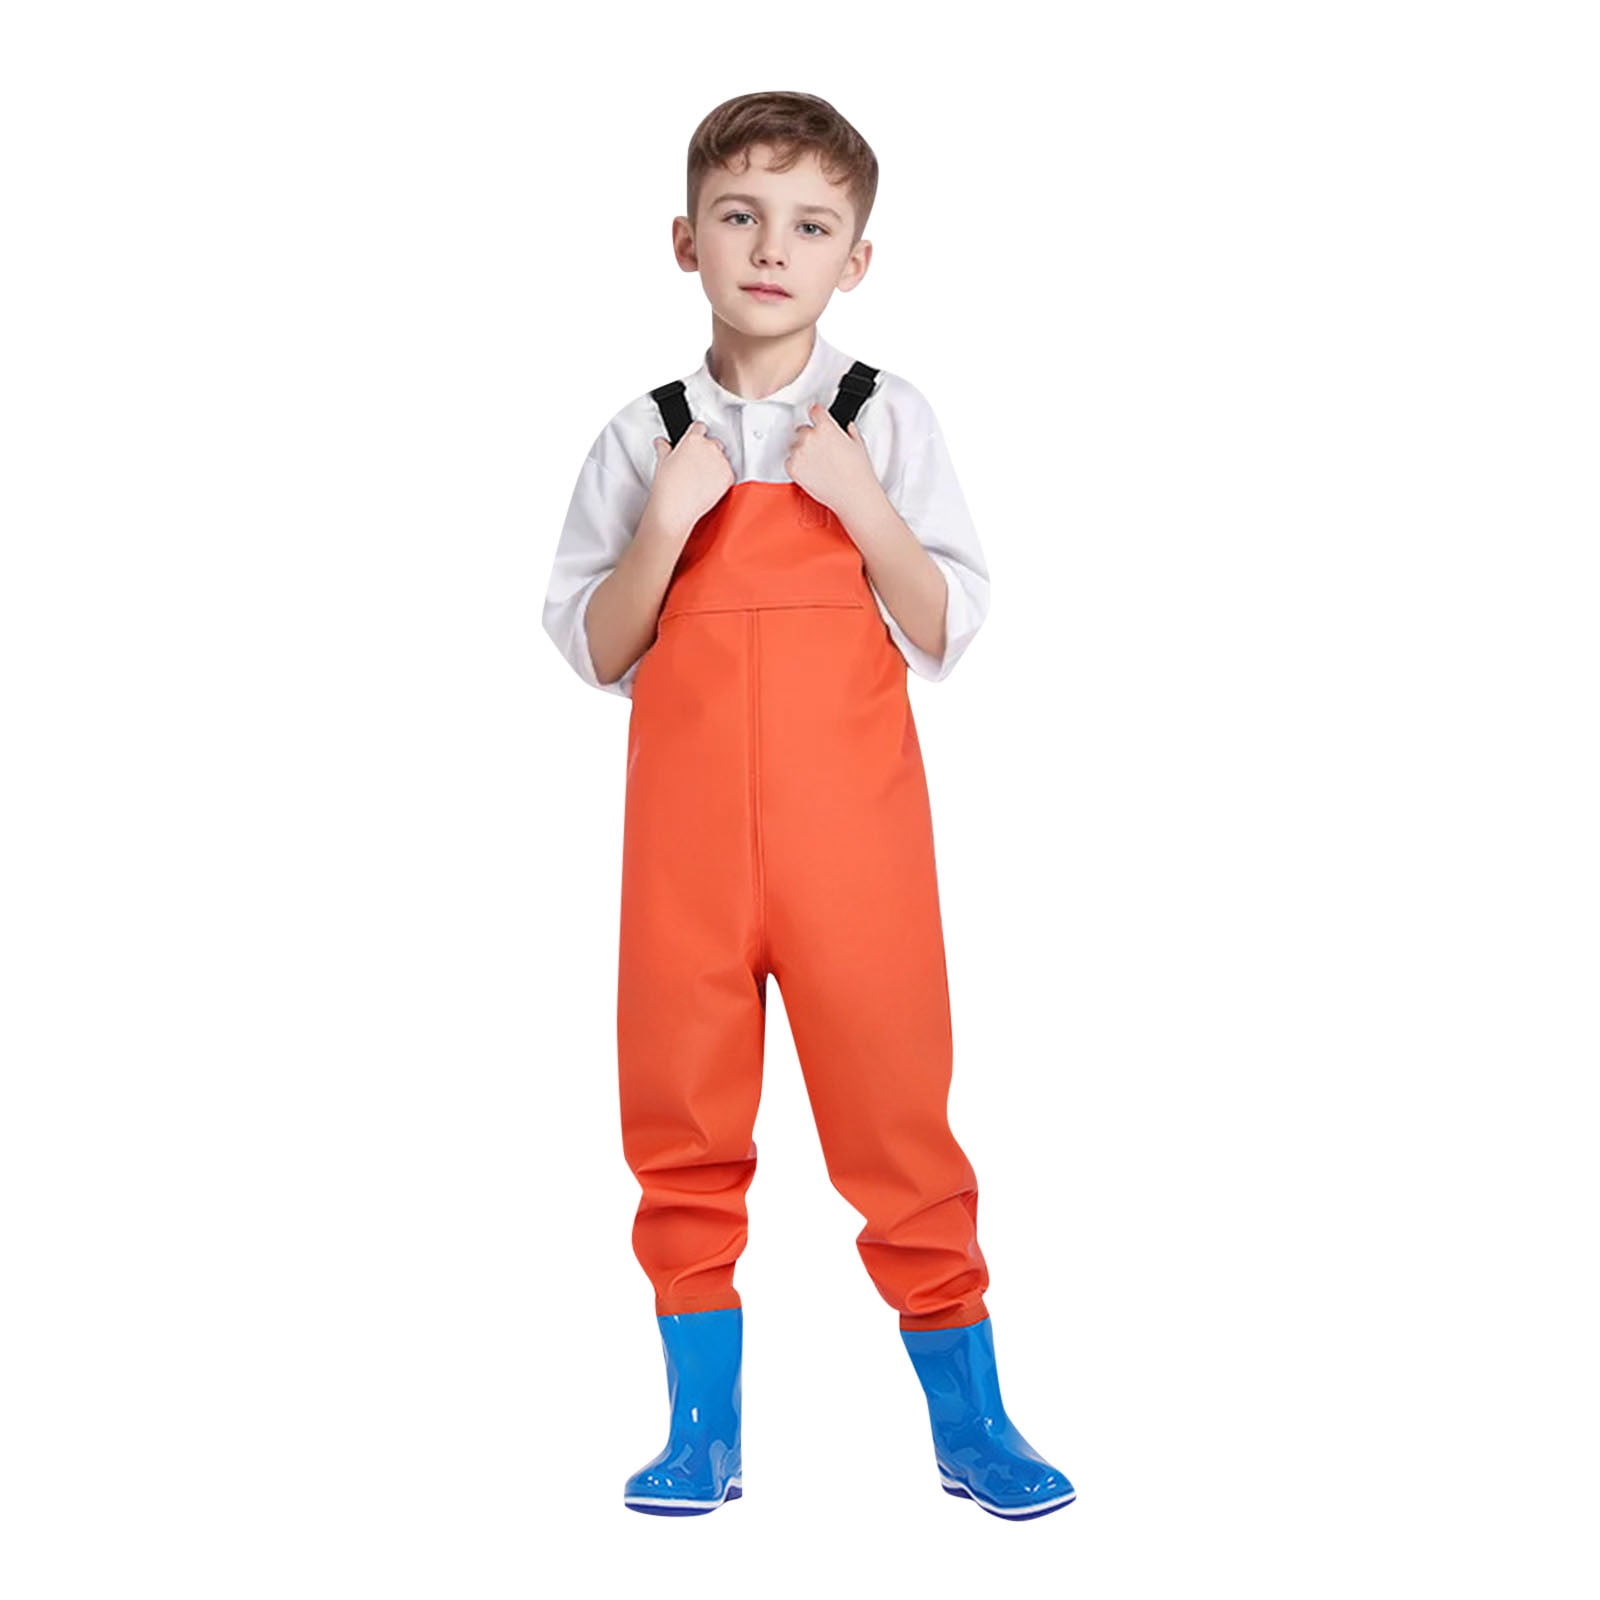 Kcodviy Kids Chest Waders Youth Fishing Waders for Toddler Children Water Proof Waders with Boots Baby Rompers for Boys Neutral Pants Baby Overalls